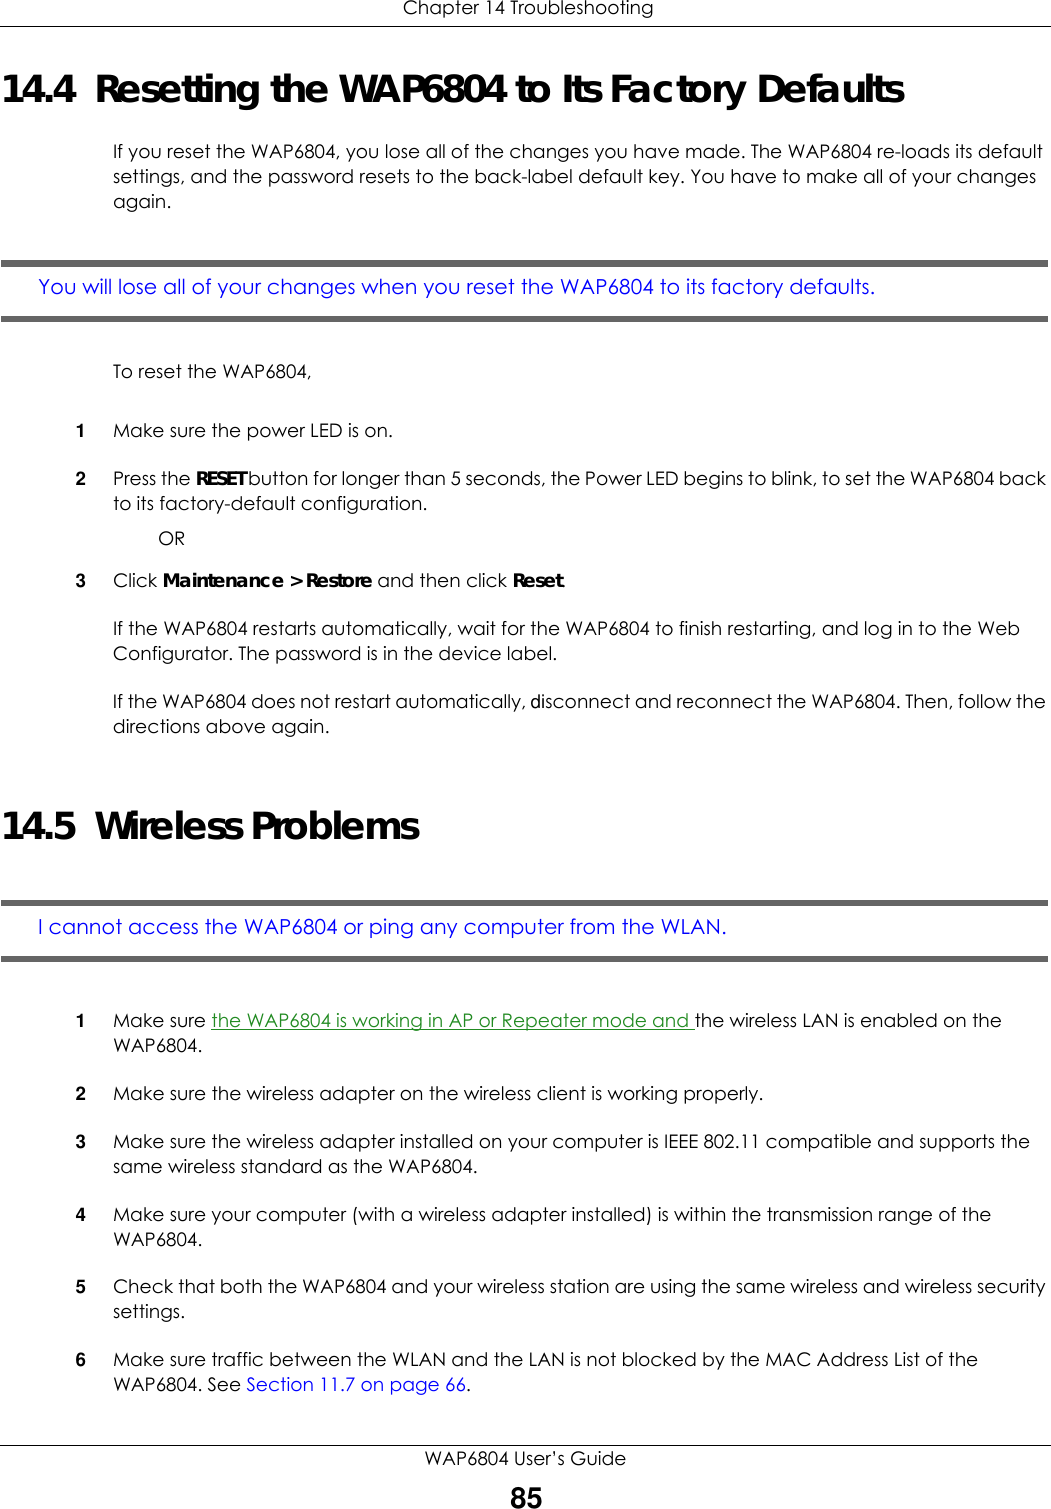  Chapter 14 TroubleshootingWAP6804 User’s Guide8514.4  Resetting the WAP6804 to Its Factory Defaults If you reset the WAP6804, you lose all of the changes you have made. The WAP6804 re-loads its default settings, and the password resets to the back-label default key. You have to make all of your changes again.You will lose all of your changes when you reset the WAP6804 to its factory defaults.To reset the WAP6804,1Make sure the power LED is on.2Press the RESET button for longer than 5 seconds, the Power LED begins to blink, to set the WAP6804 back to its factory-default configuration.OR3Click Maintenance &gt; Restore and then click Reset.If the WAP6804 restarts automatically, wait for the WAP6804 to finish restarting, and log in to the Web Configurator. The password is in the device label.If the WAP6804 does not restart automatically, disconnect and reconnect the WAP6804. Then, follow the directions above again.14.5  Wireless ProblemsI cannot access the WAP6804 or ping any computer from the WLAN.1Make sure the WAP6804 is working in AP or Repeater mode and the wireless LAN is enabled on the WAP6804.2Make sure the wireless adapter on the wireless client is working properly.3Make sure the wireless adapter installed on your computer is IEEE 802.11 compatible and supports the same wireless standard as the WAP6804.4Make sure your computer (with a wireless adapter installed) is within the transmission range of the WAP6804.5Check that both the WAP6804 and your wireless station are using the same wireless and wireless security settings.6Make sure traffic between the WLAN and the LAN is not blocked by the MAC Address List of the WAP6804. See Section 11.7 on page 66.